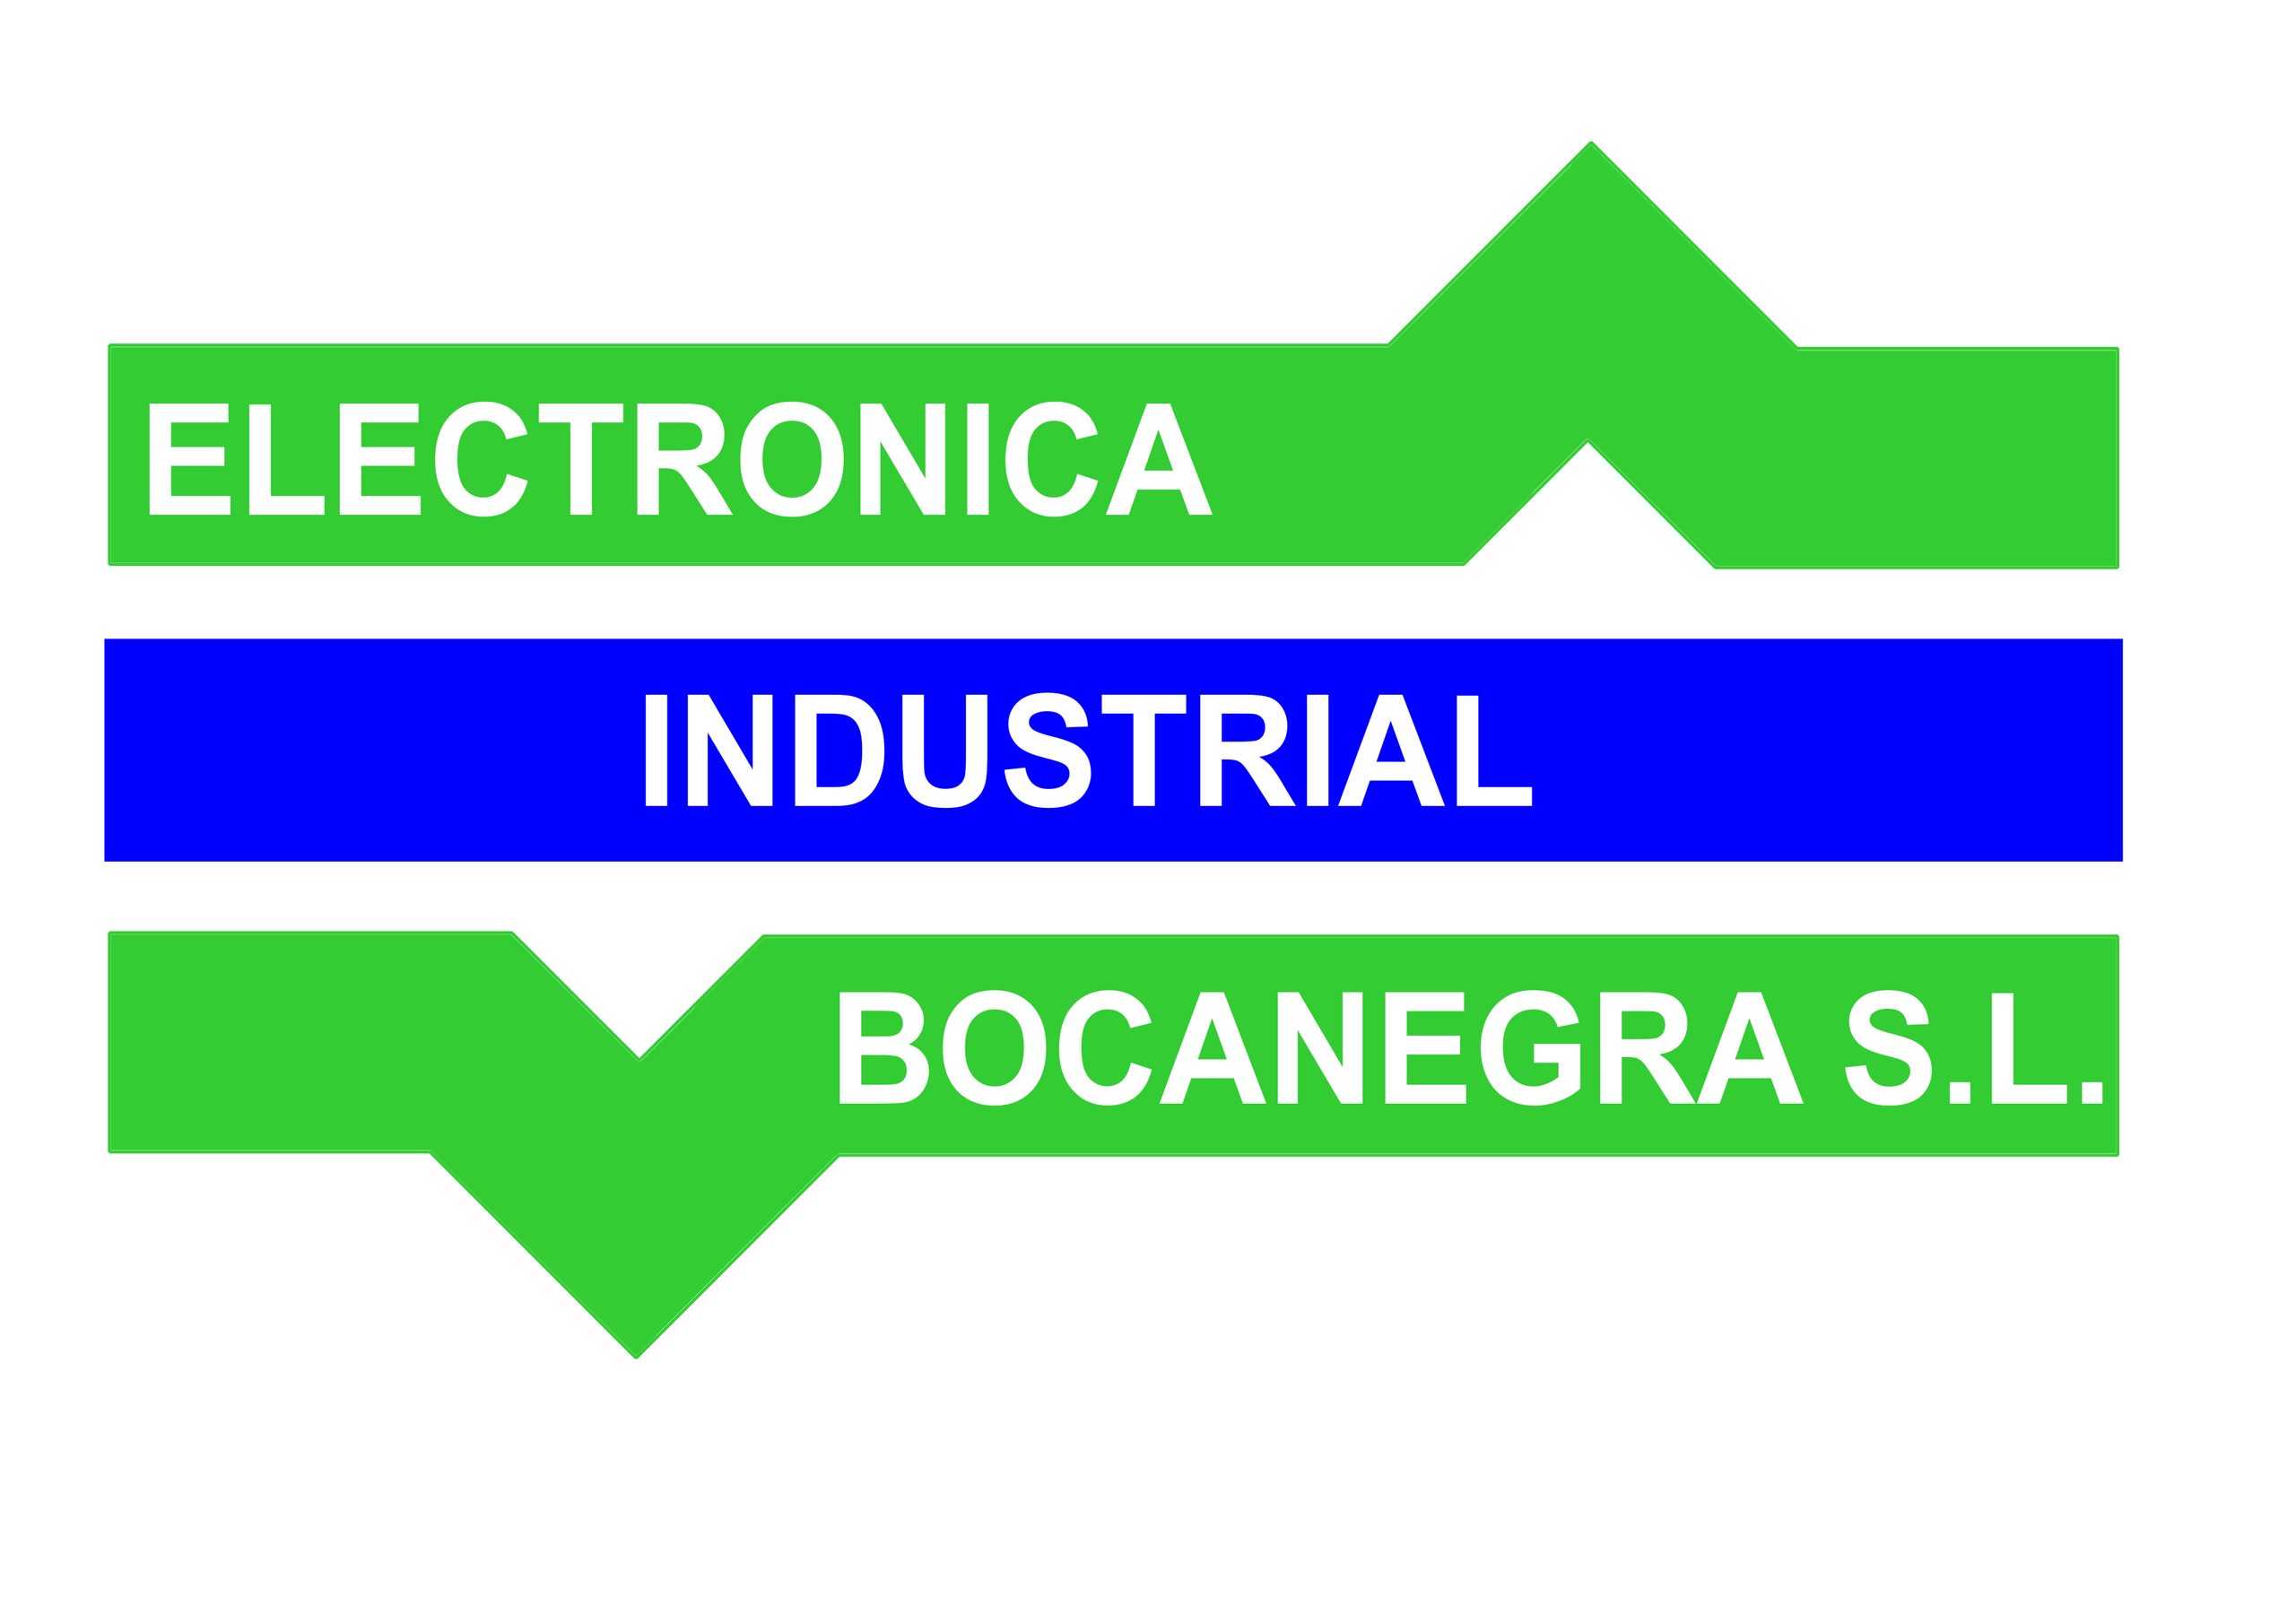 ELECTRONICA INDUSTRIAL BOCANEGRA S.L.